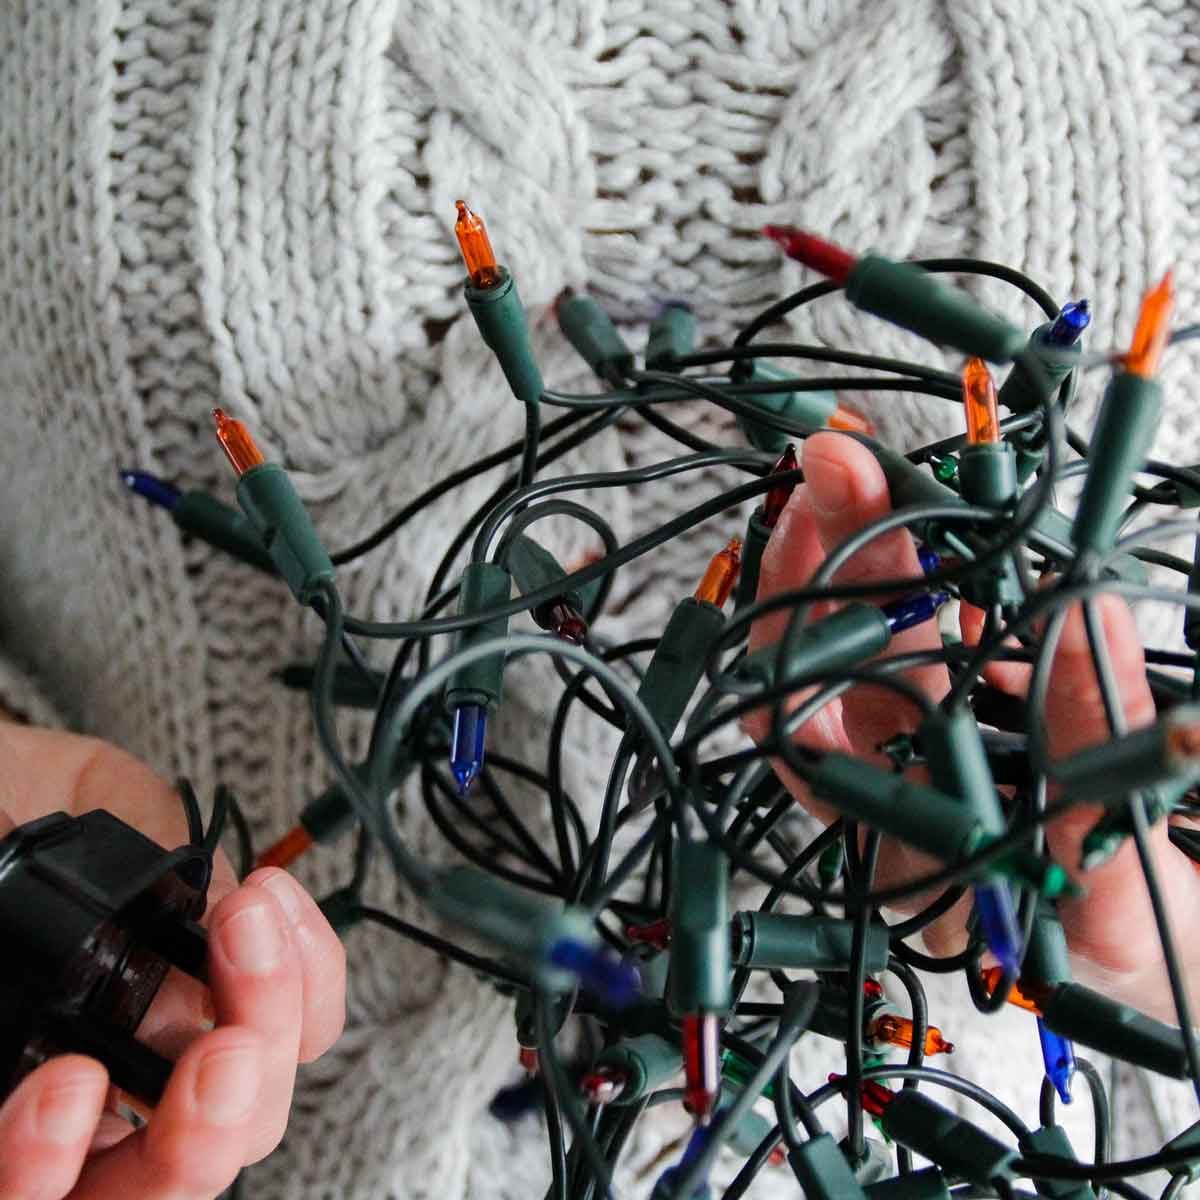 https://www.familyhandyman.com/wp-content/uploads/2020/12/how-to-fix-christmas-lights-GettyImages-1348764226.jpg